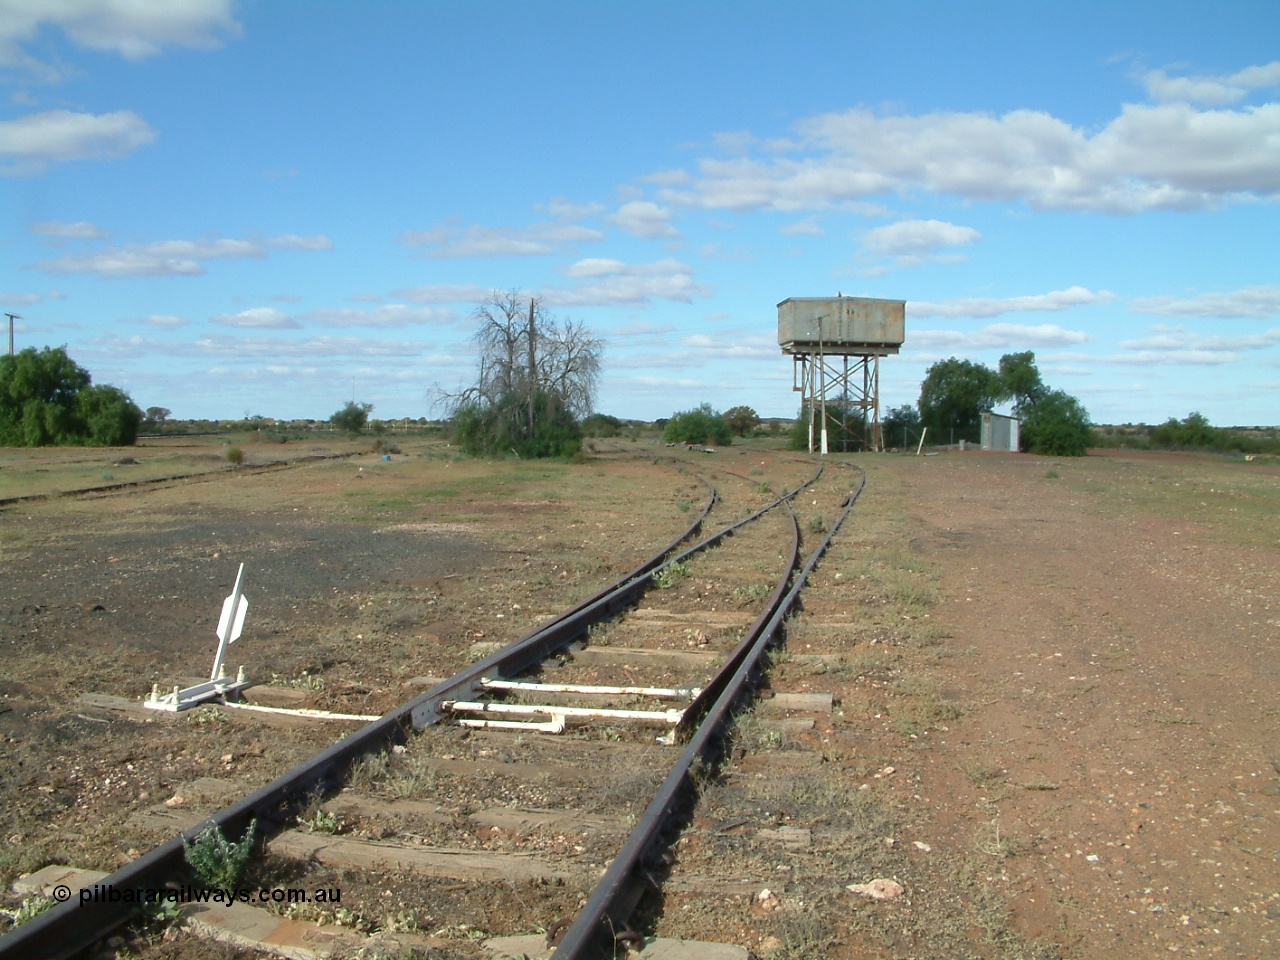 030415 154820
Tarcoola, at the 504.5 km, looking south east along the No. 1 Water Road, set of points is the No. 2 Loco Road, No. 1 Loco and Camp Train roads are visible to the left. Water tank on stand. [url=https://goo.gl/maps/AhdgsdPfRS8cXWMP8]GeoData location[/url]. 15th April 2003.
